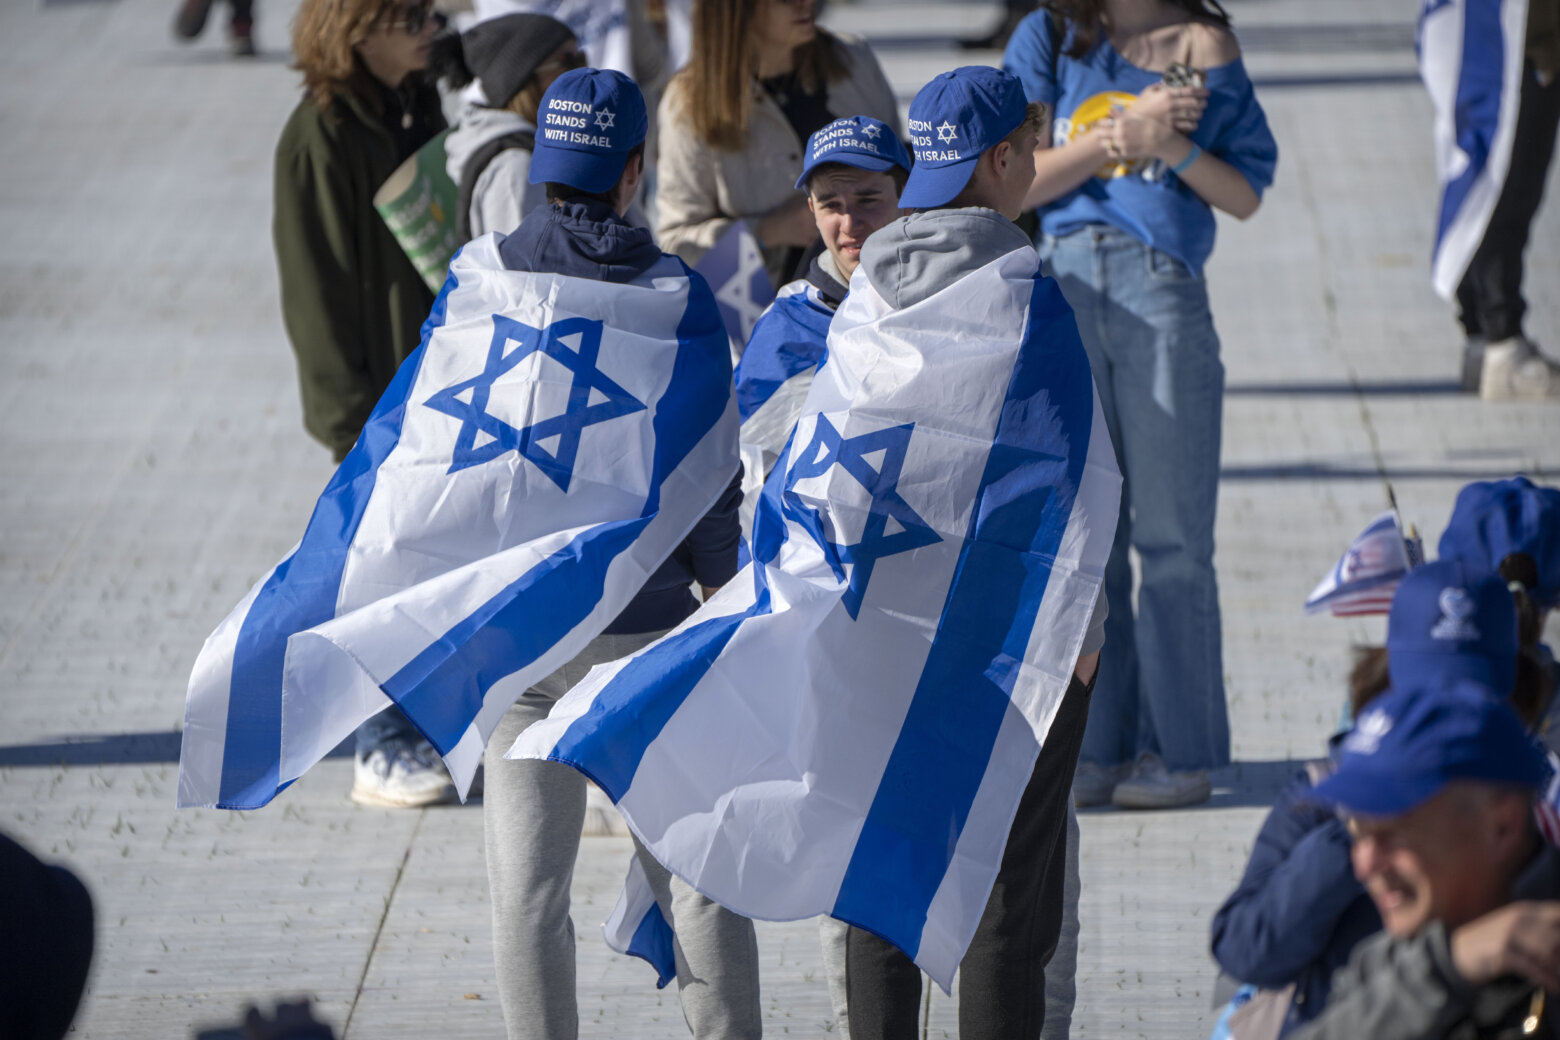 ‘March for Israel’ brings big crowds to National Mall